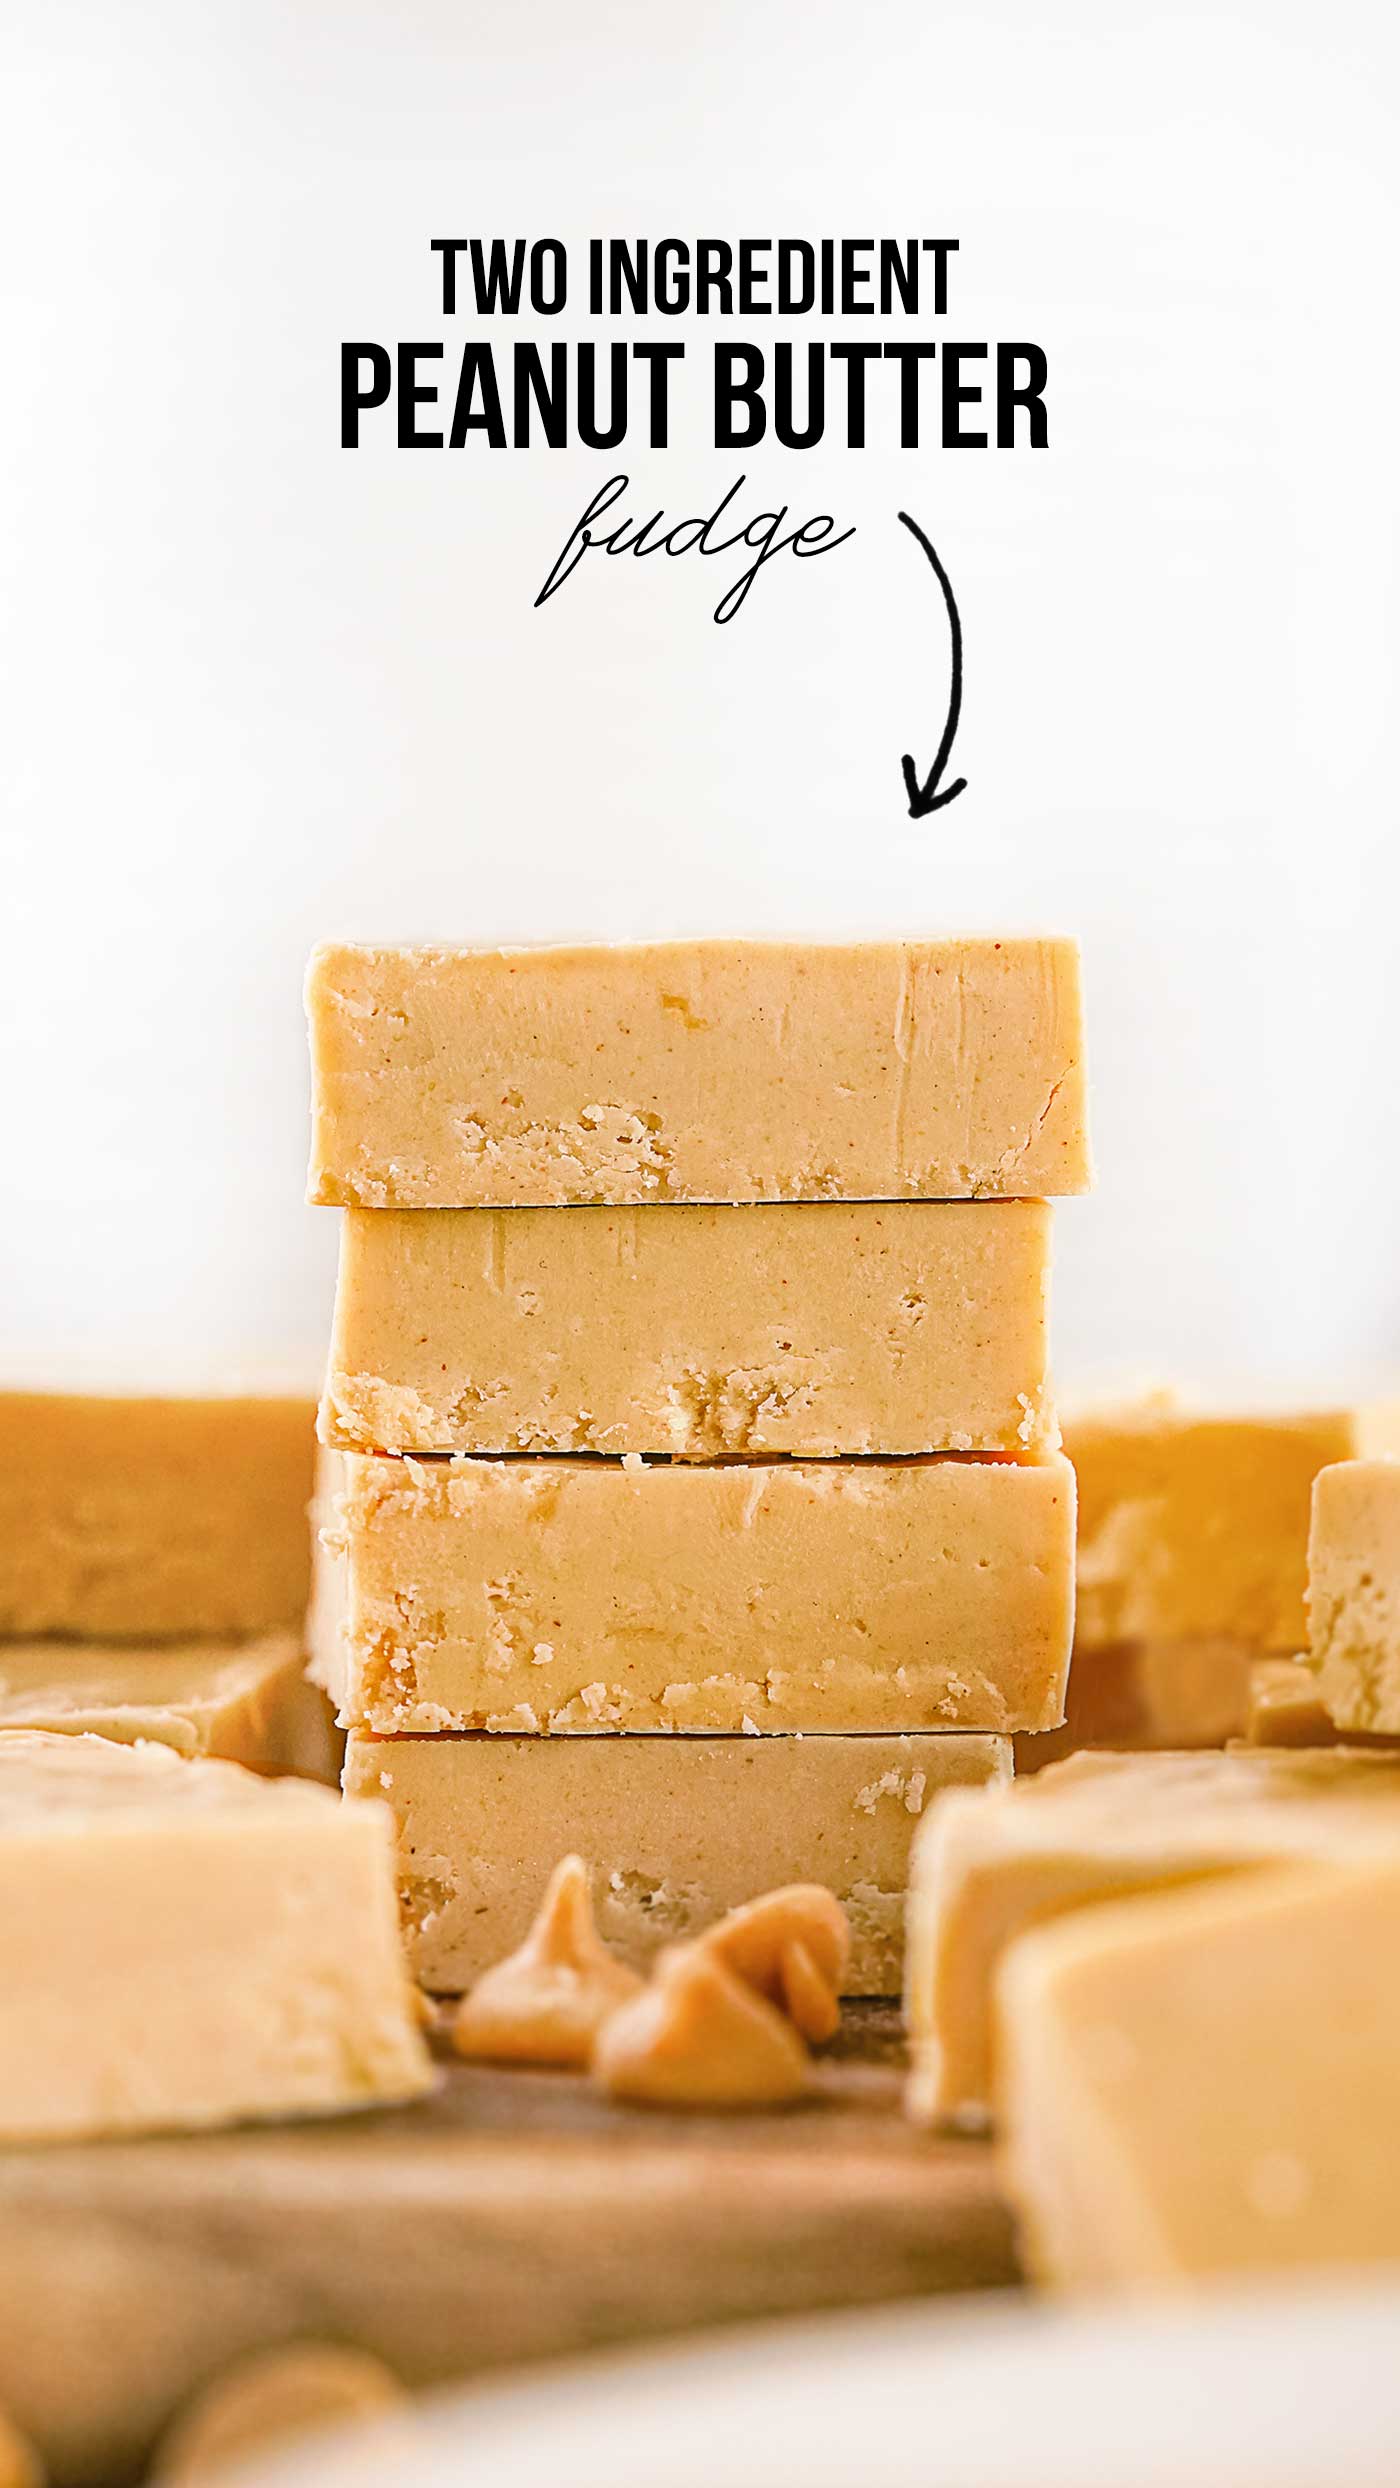 picture of fudge with text